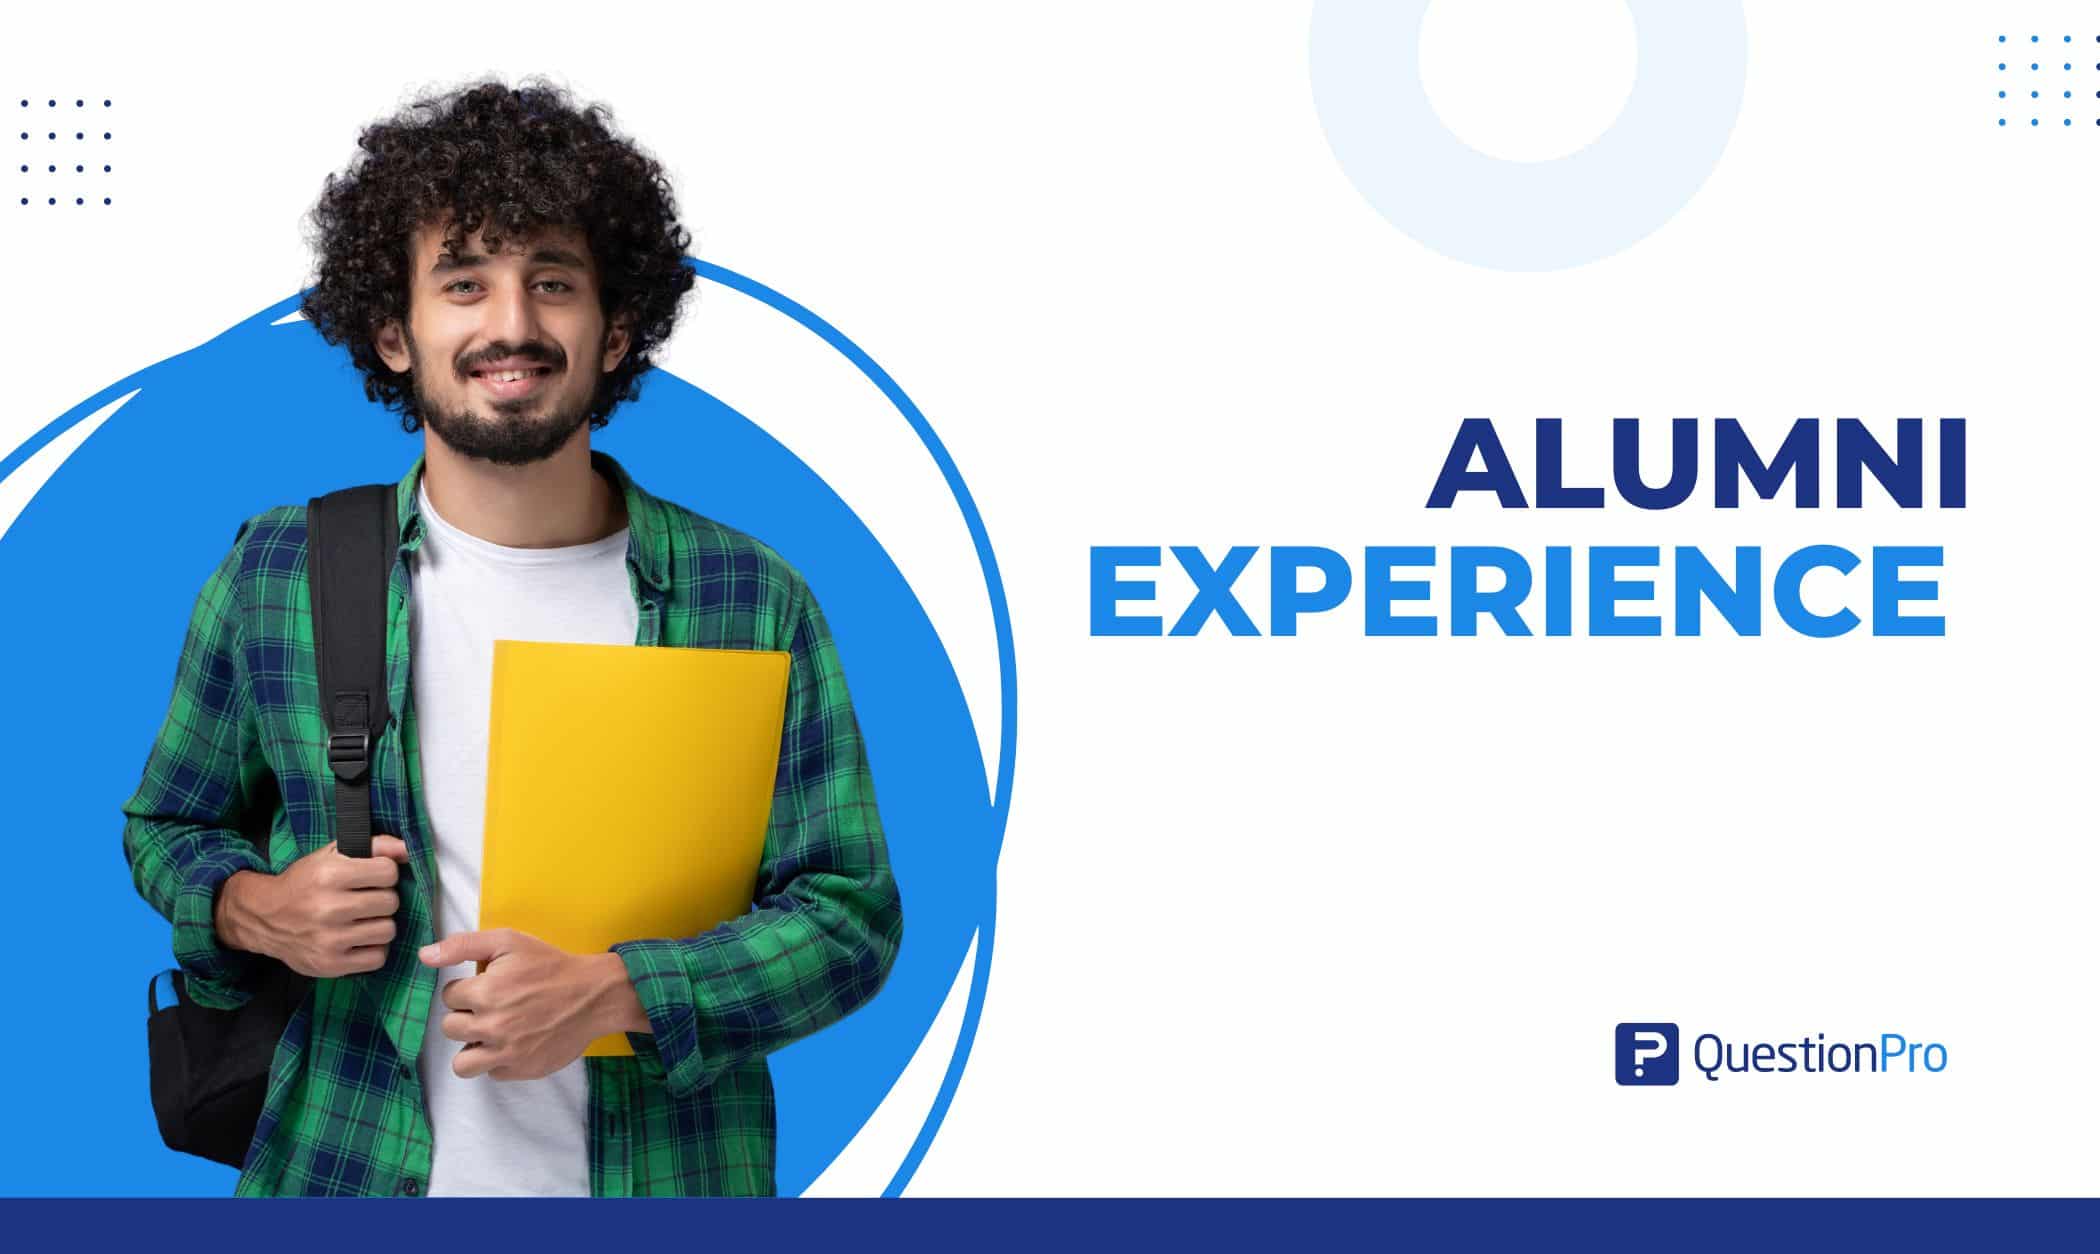 Alumni Experience: What it is + How to do it